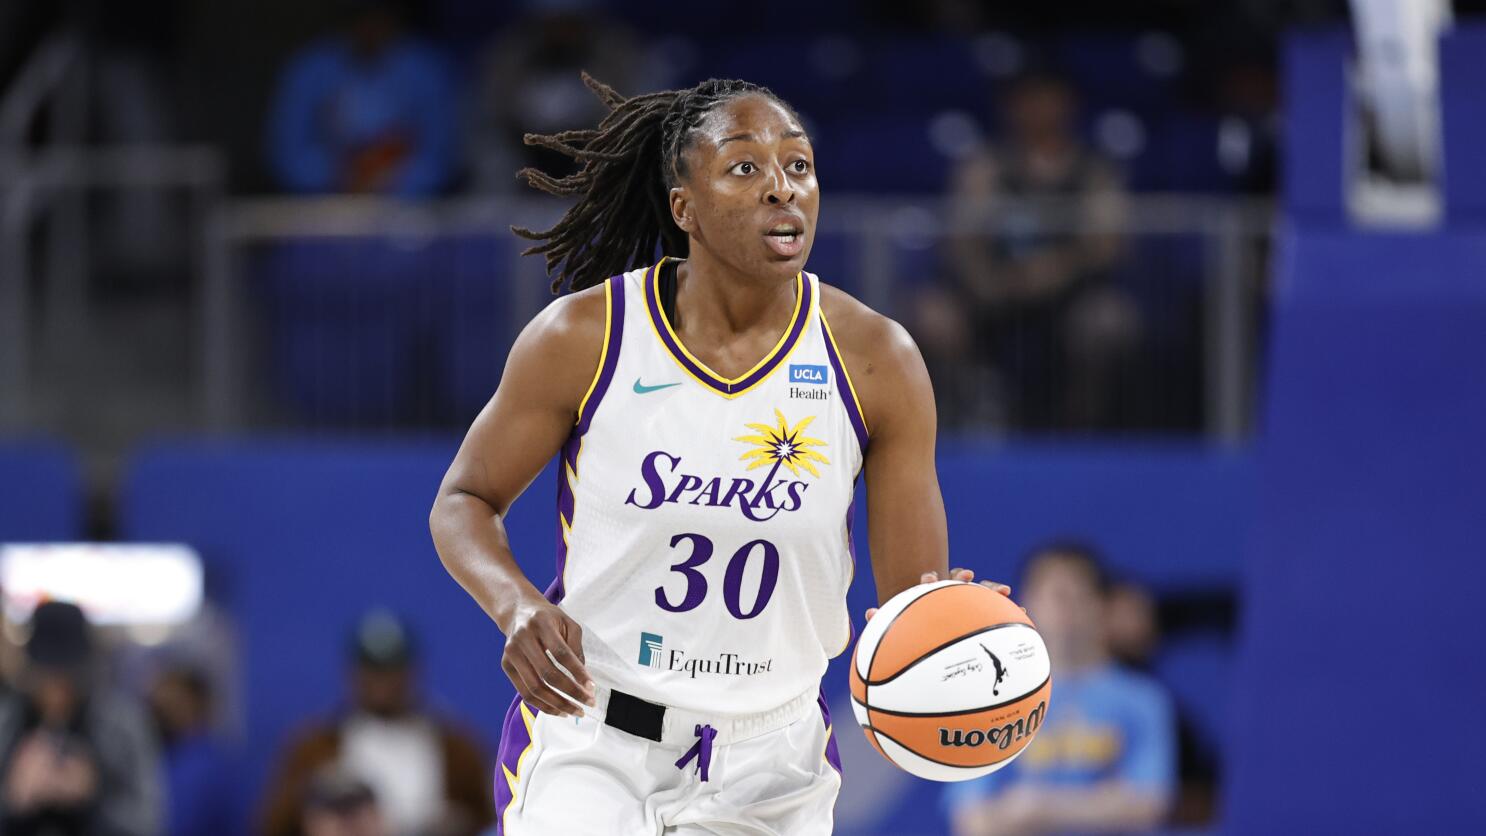 Sparks fall to Connecticut Sun, finish season-opening trip 2-2